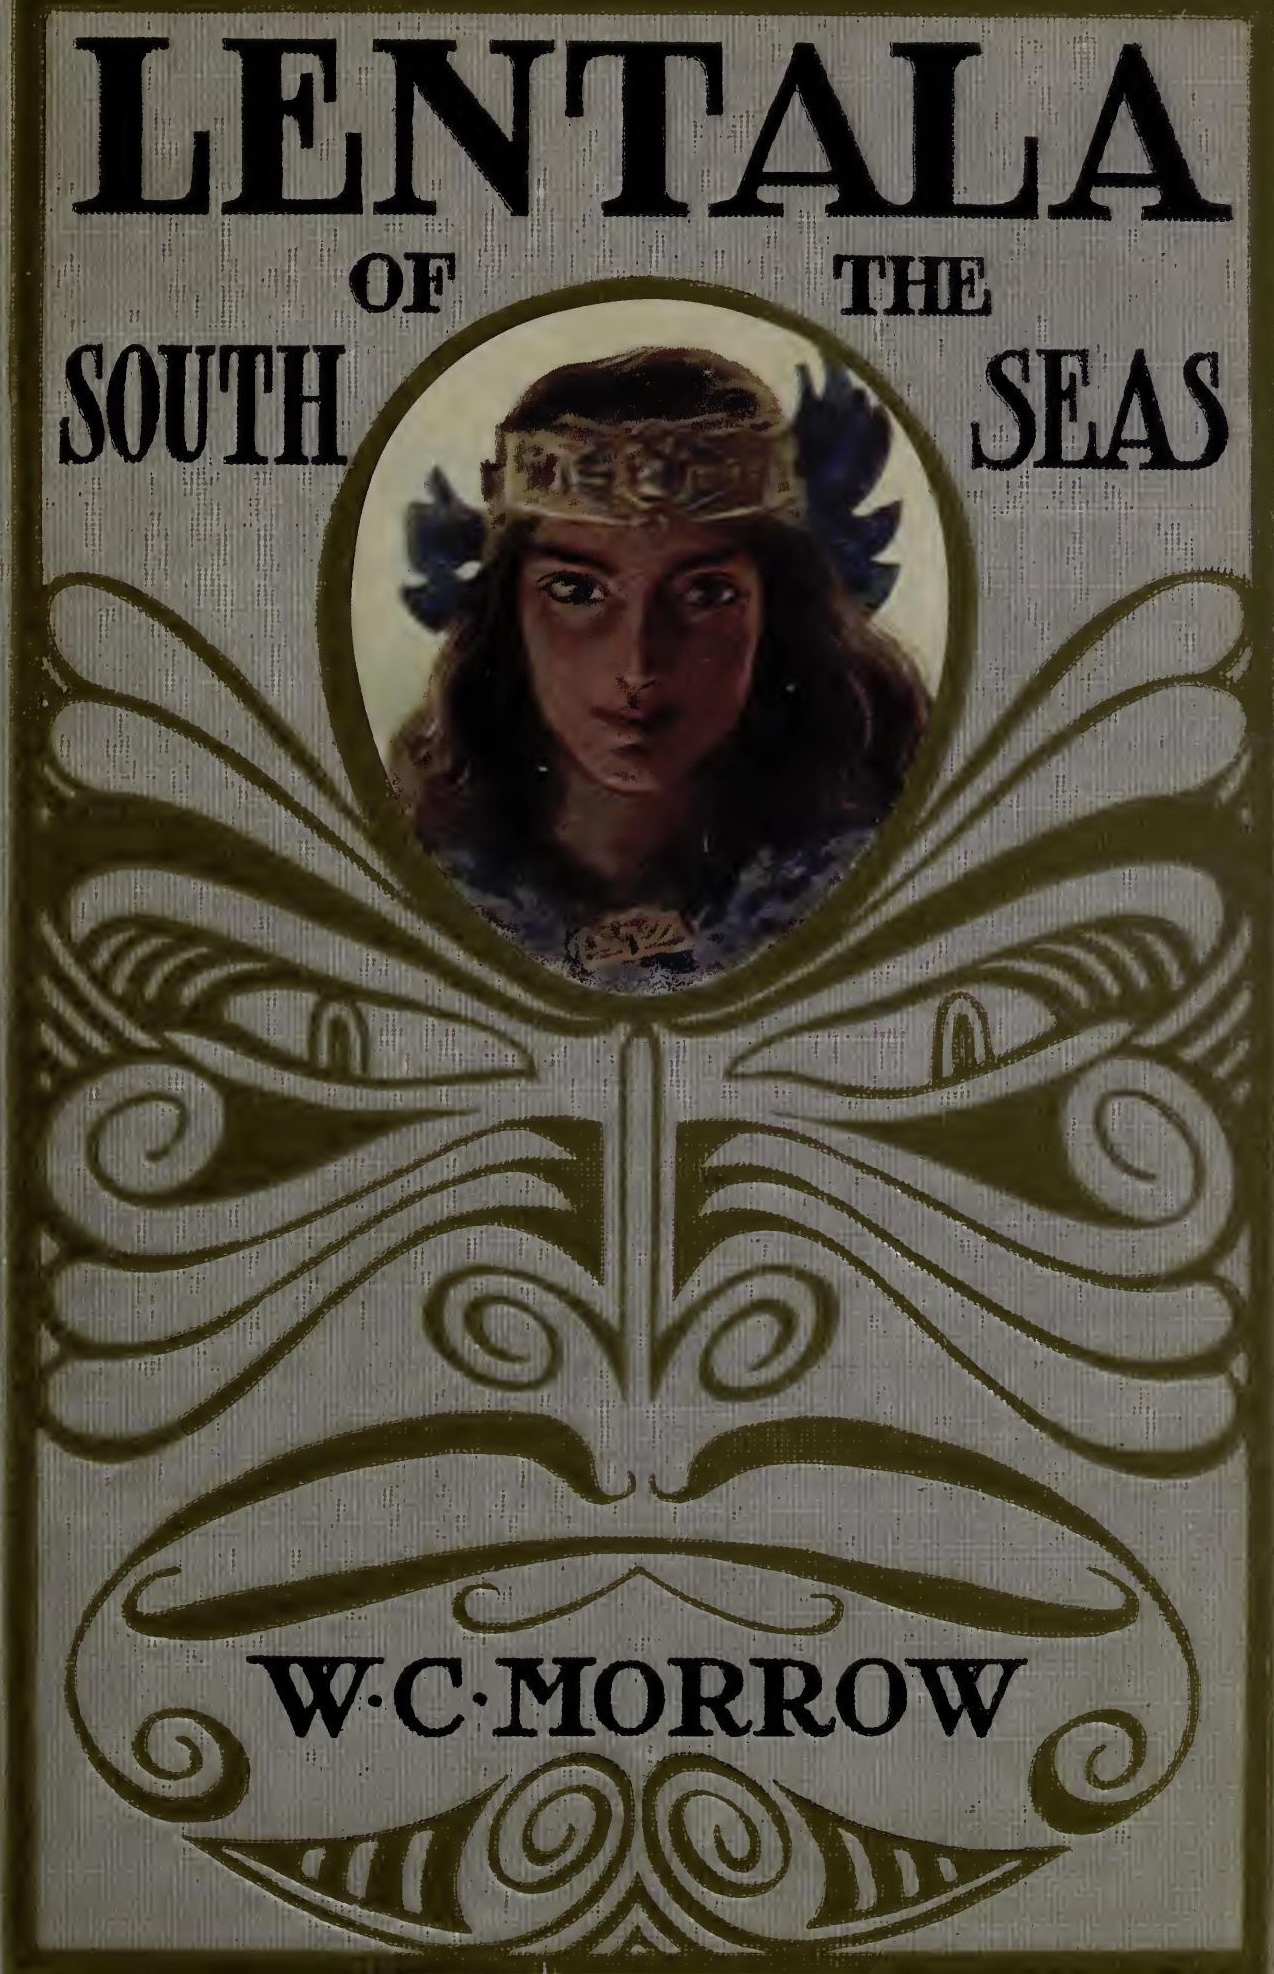 Lentala of the South Seas, The Romantic Tale Of a Lost Colony, by W